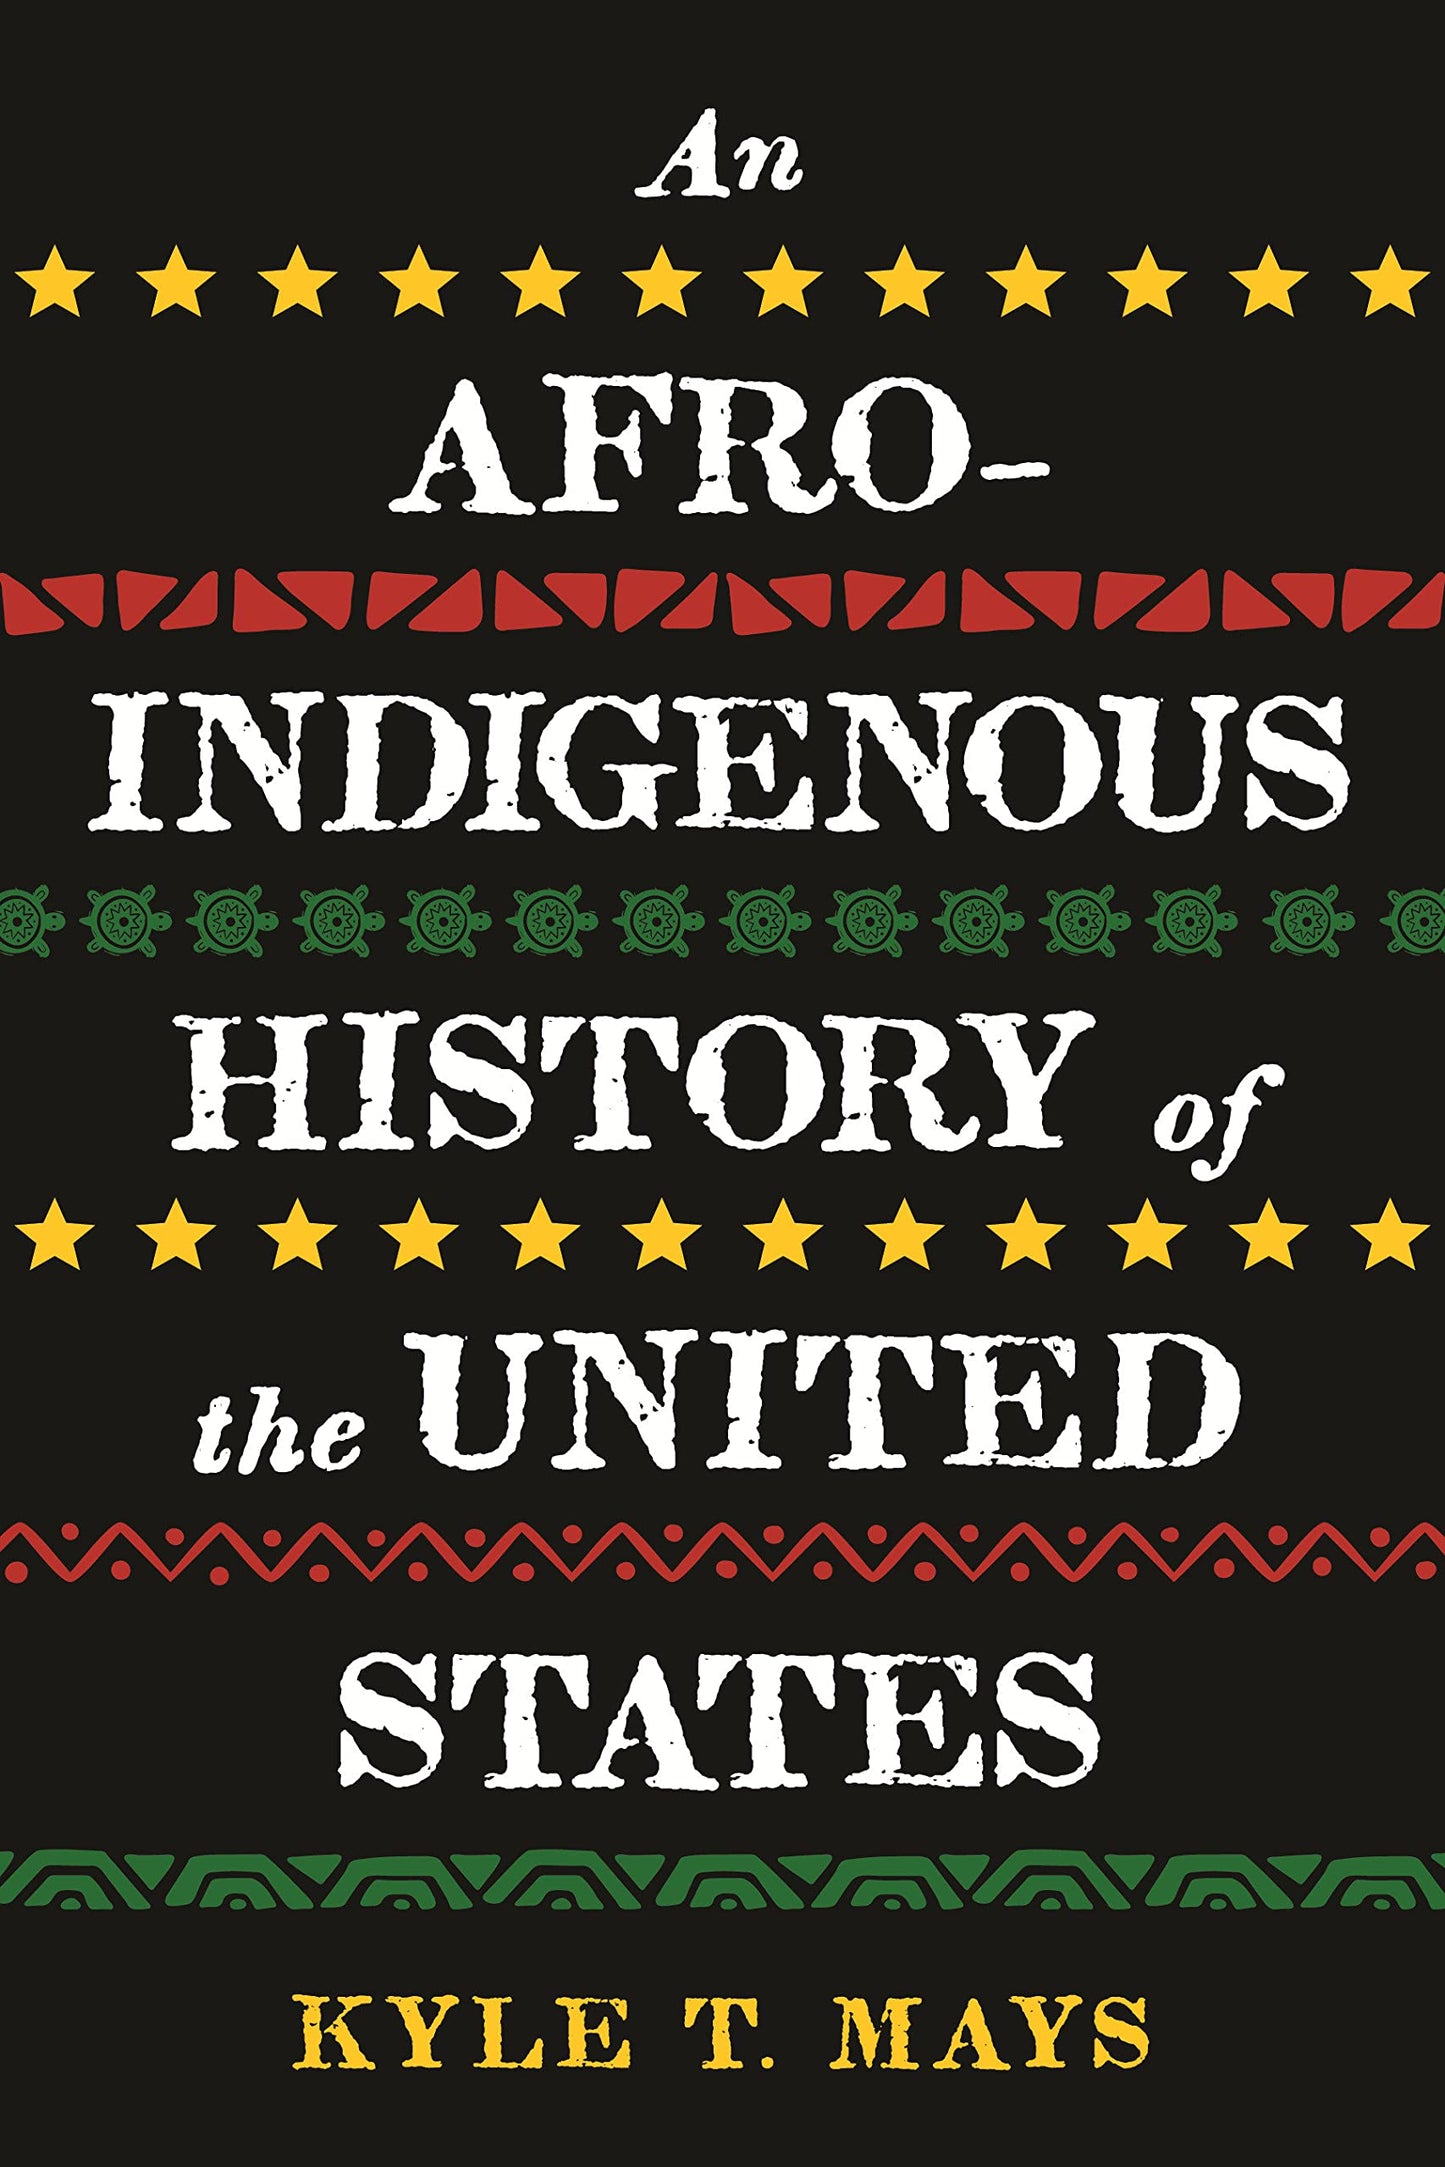 An Afro-Indigenous History of the United States, by Kyle T. Mays